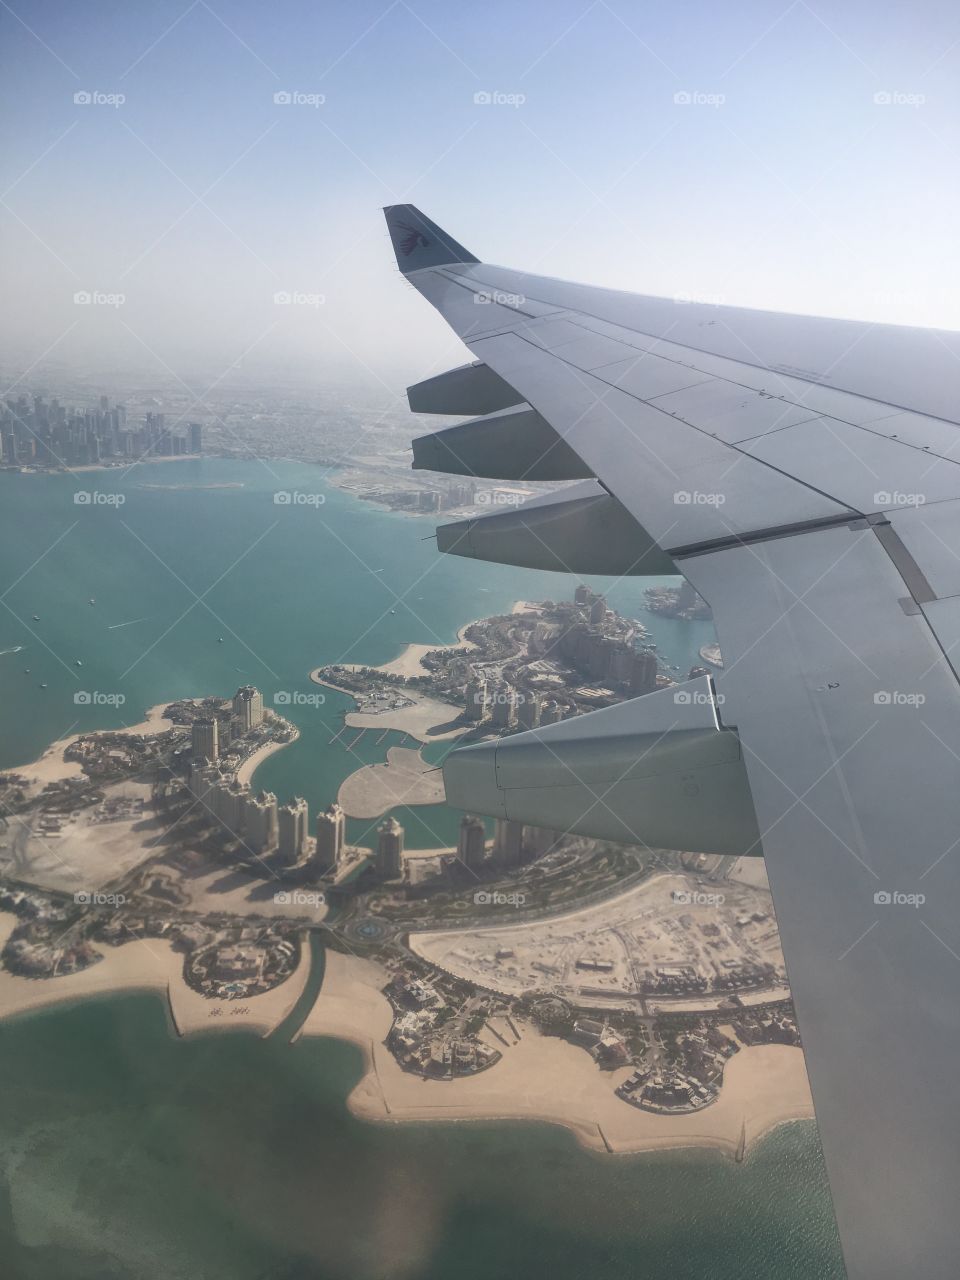 Doha, Qatar from a Boing 767 Dreamliner